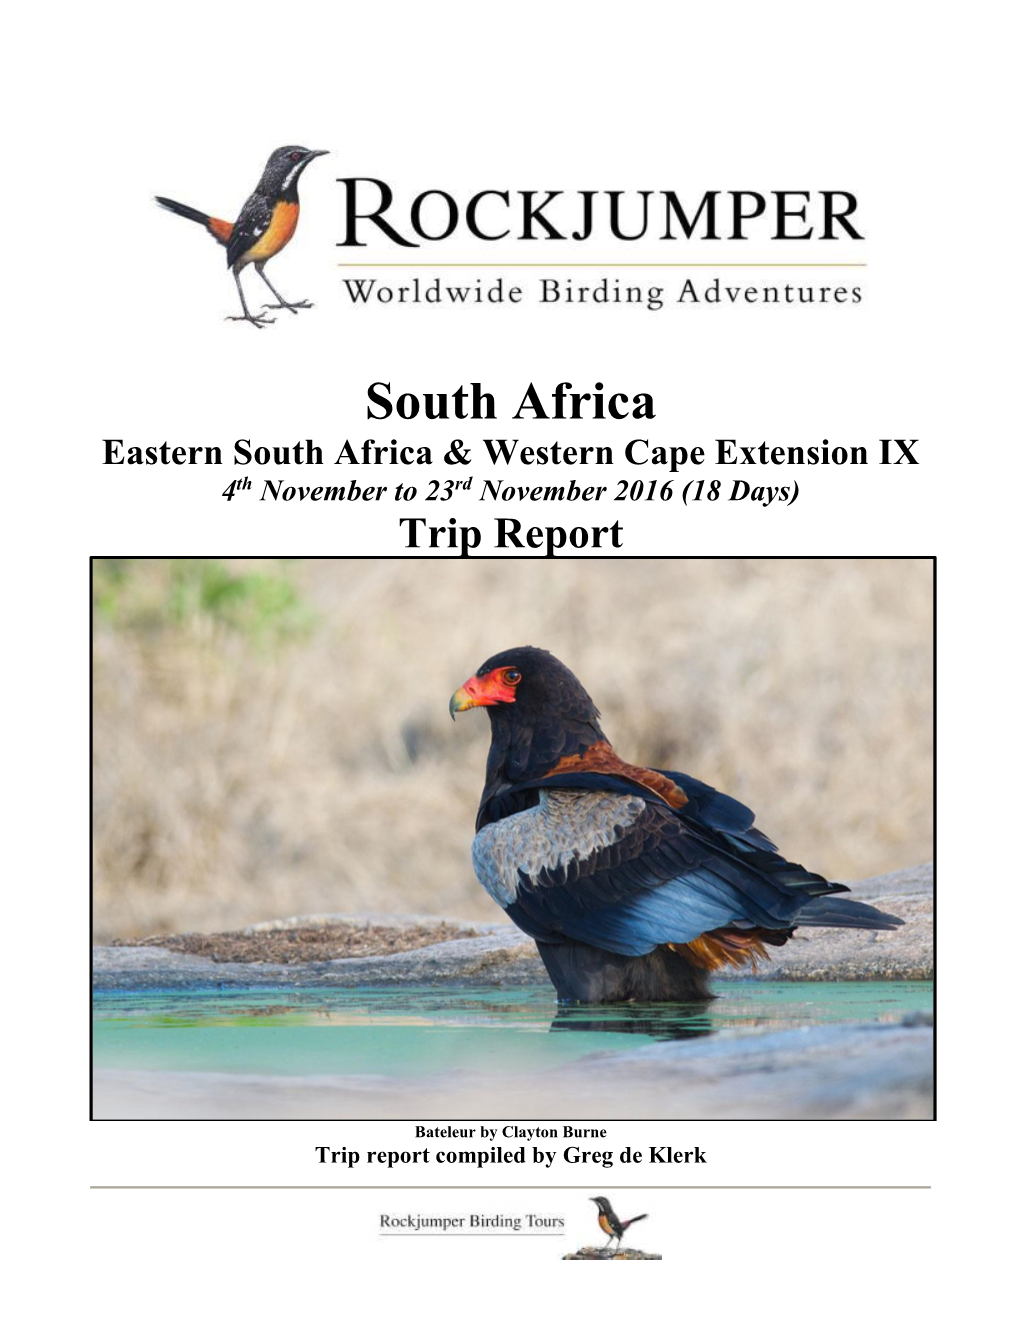 South Africa Eastern South Africa & Western Cape Extension IX 4Th November to 23Rd November 2016 (18 Days) Trip Report